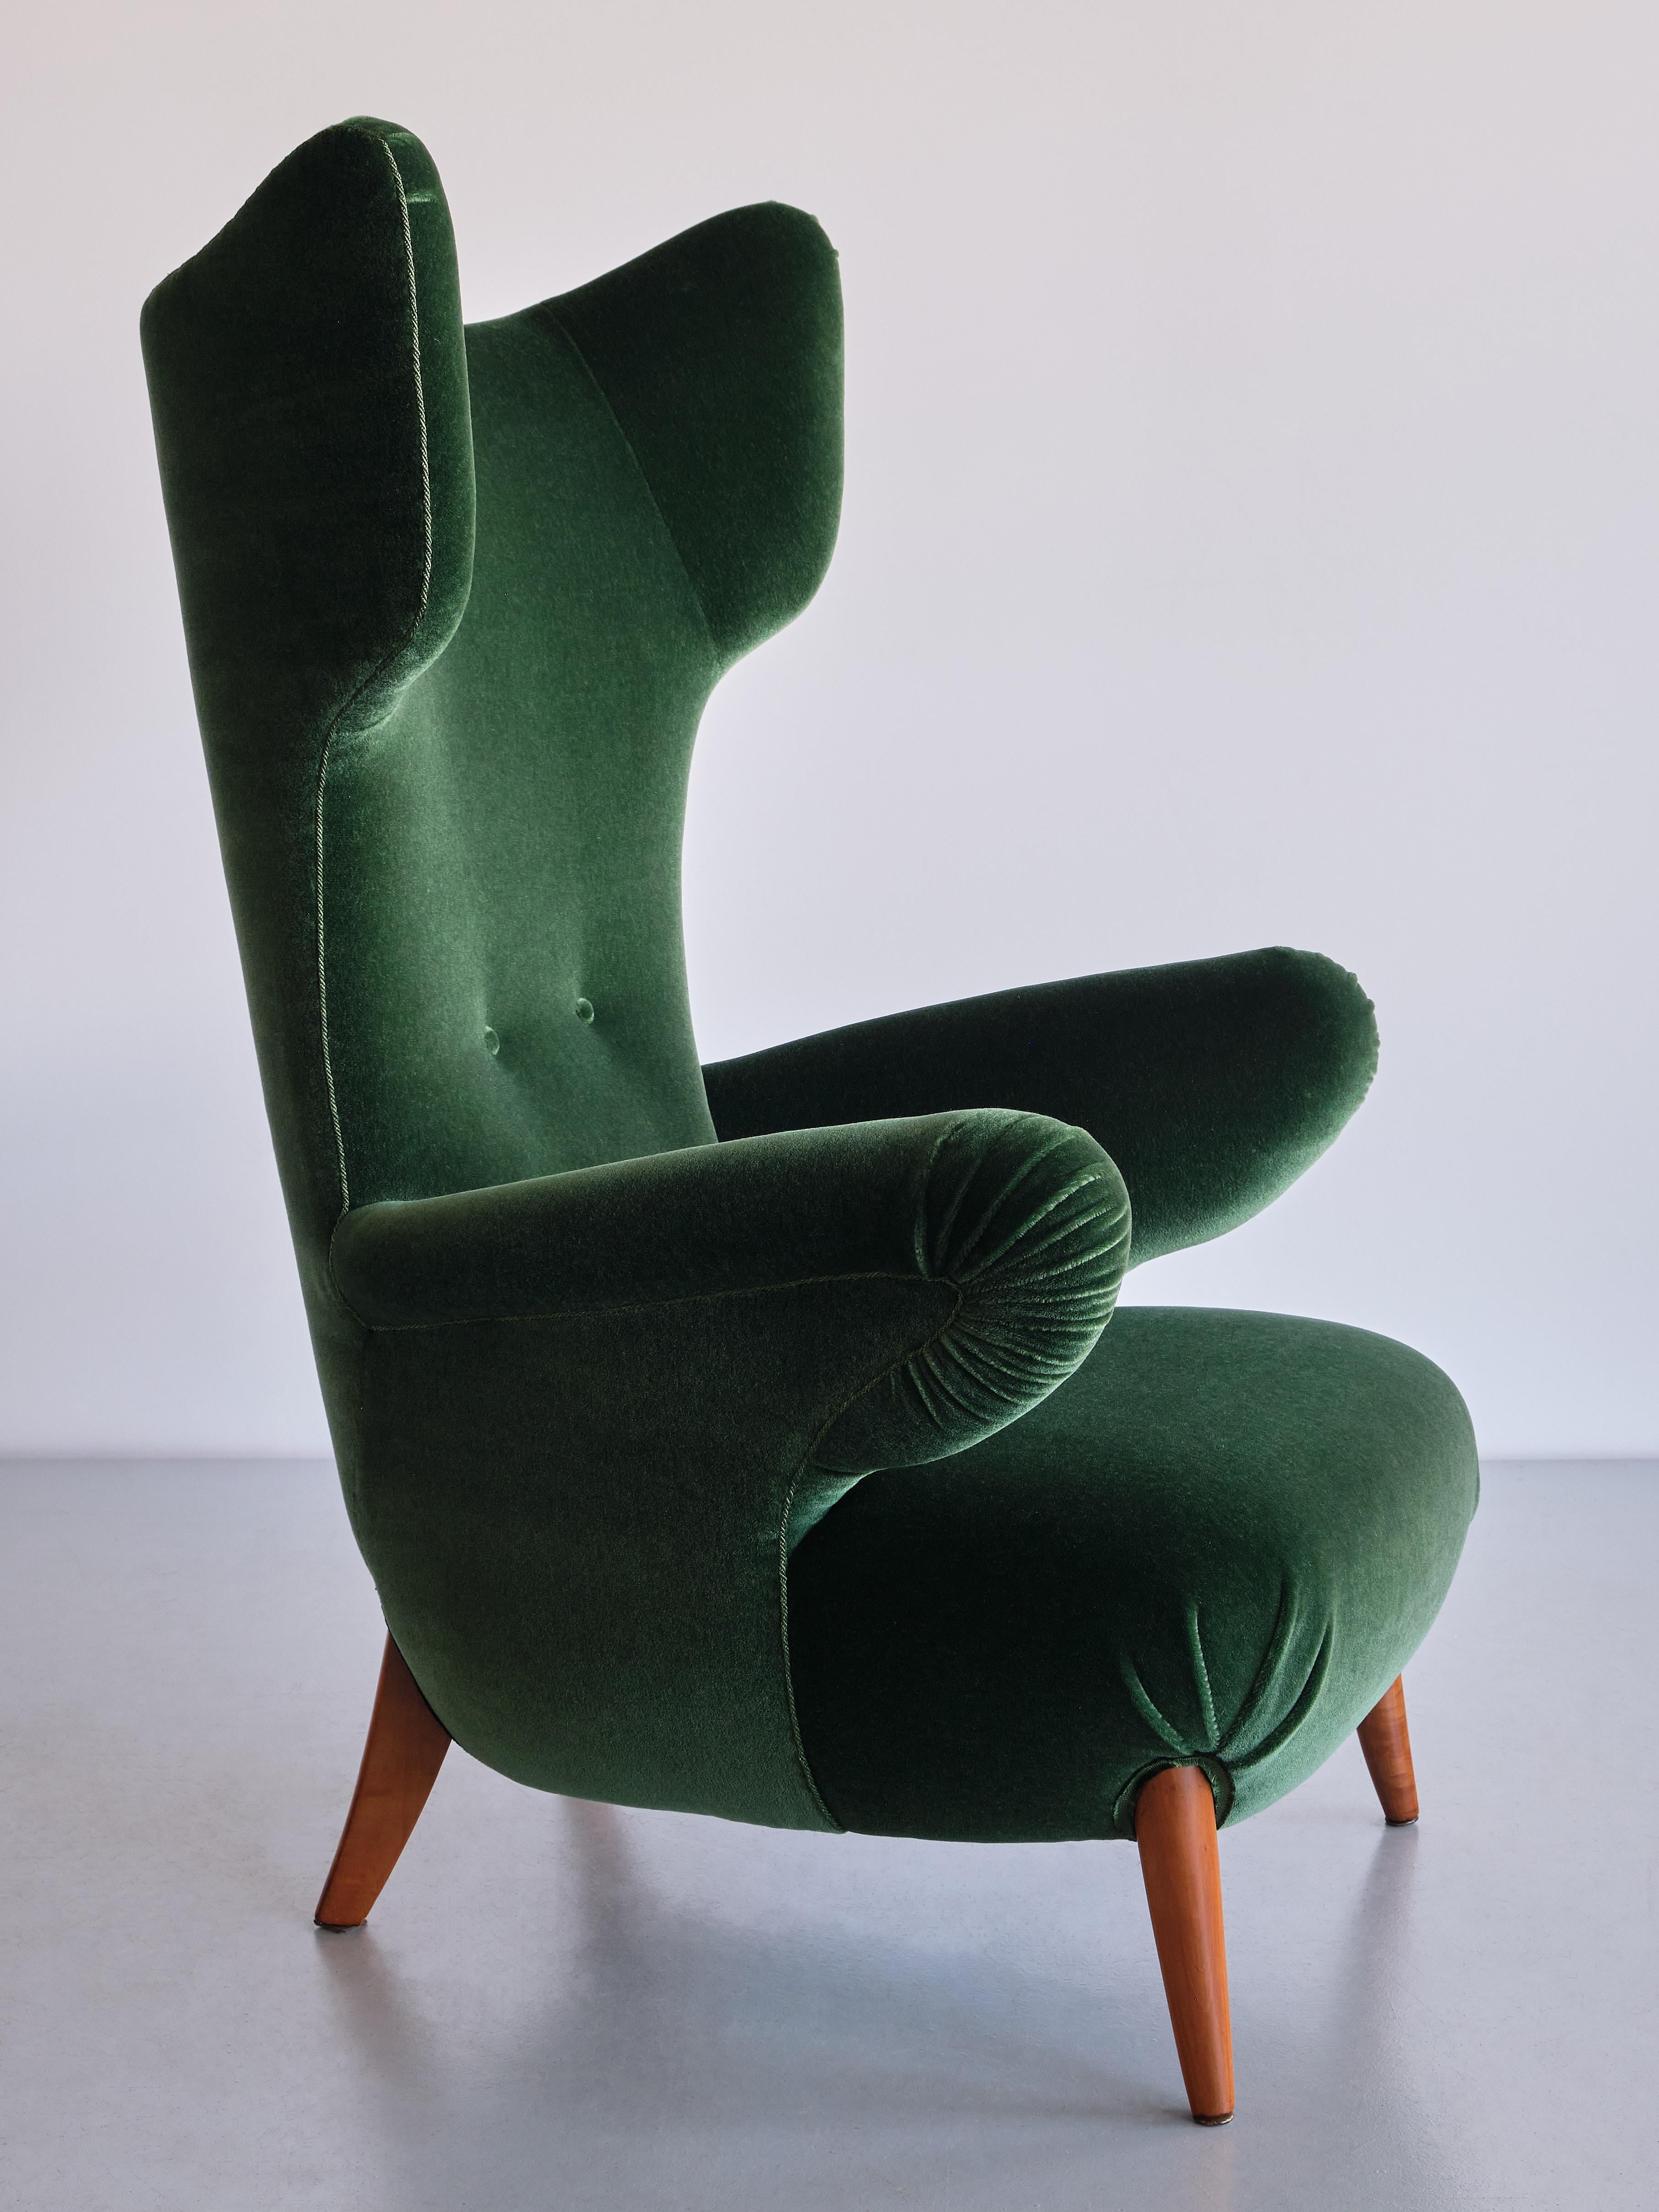 Important Ottorino Aloisio Wingback Chair in Green Mohair, Colli, Italy, 1957 In Good Condition For Sale In The Hague, NL